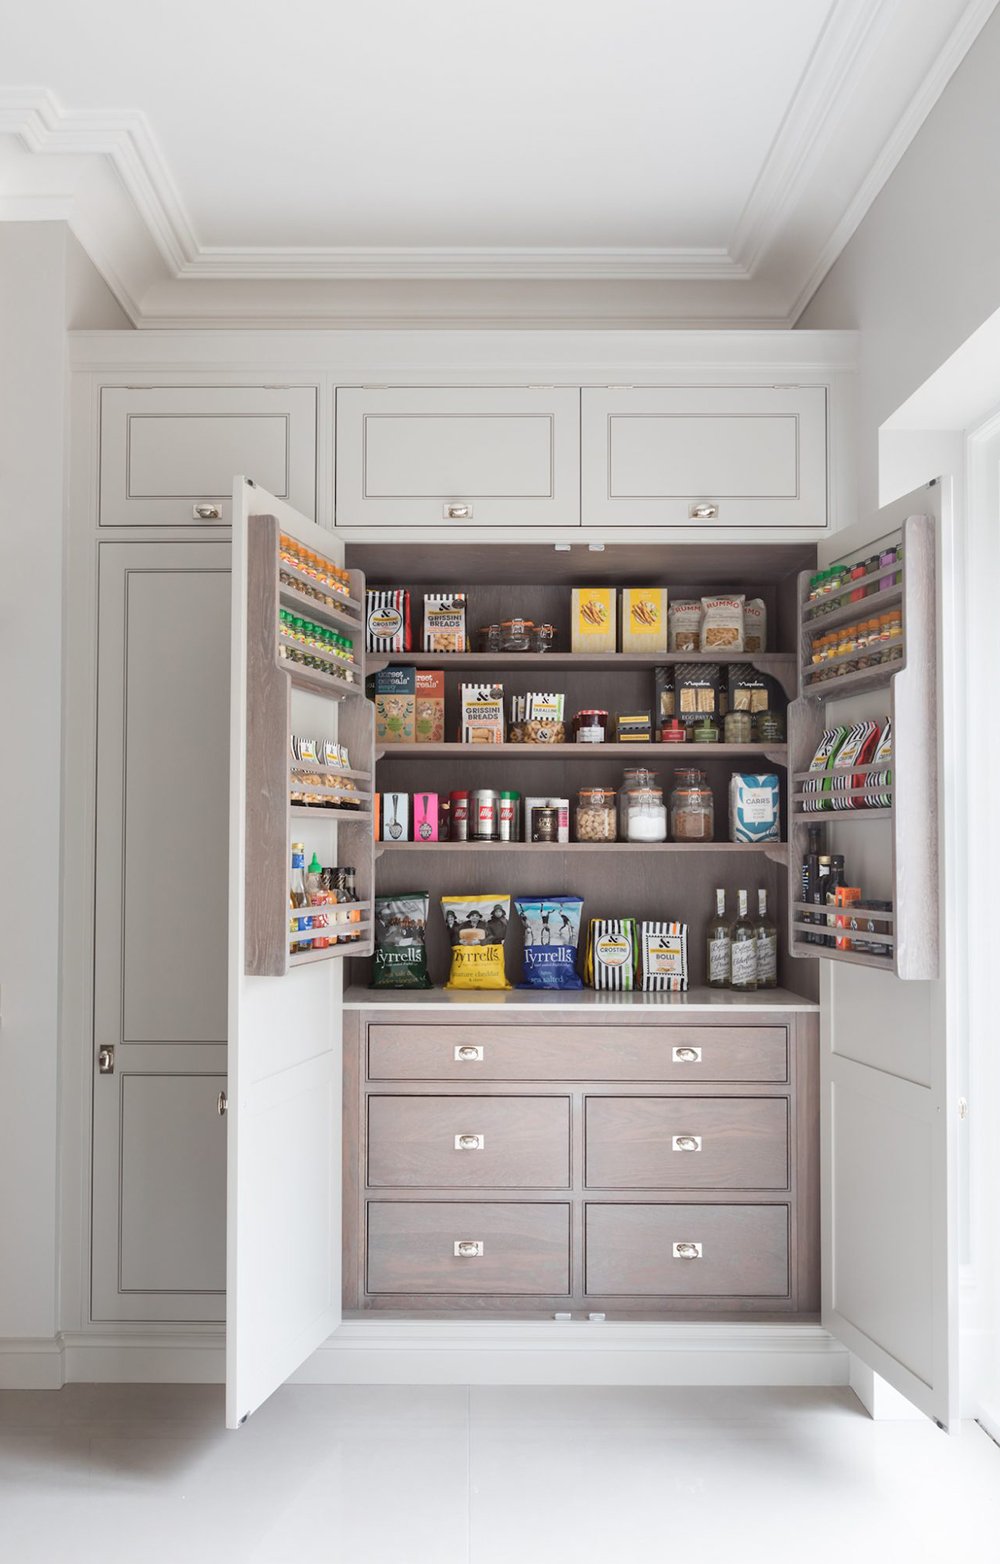 The Prettiest Pantries & My Favorite Canisters - roomfortuesday.com